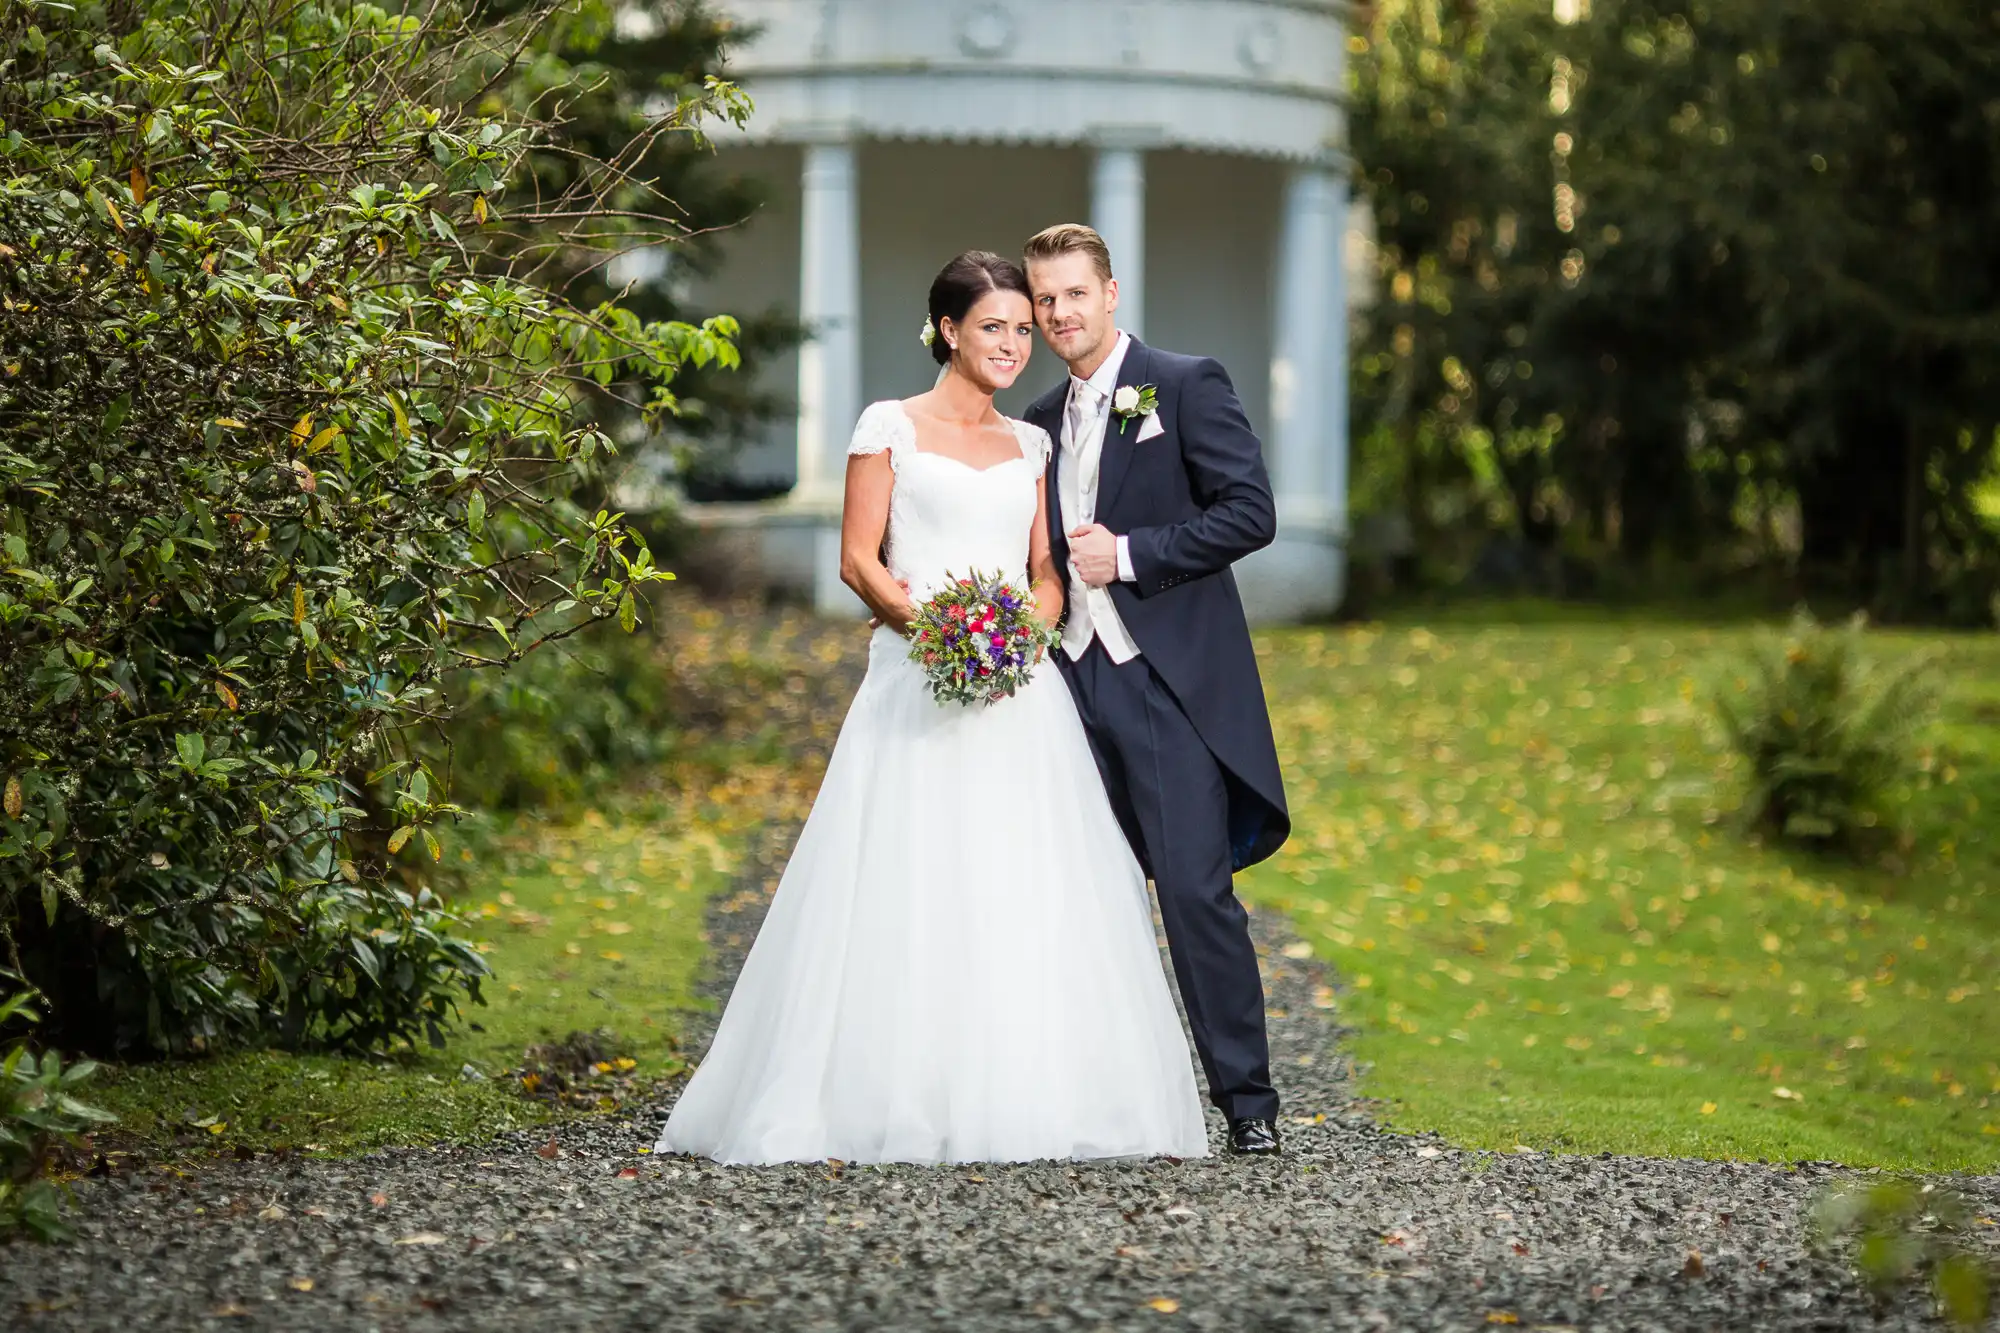 A bride and groom smiling and posing in a garden pathway, with the bride holding a colorful bouquet.